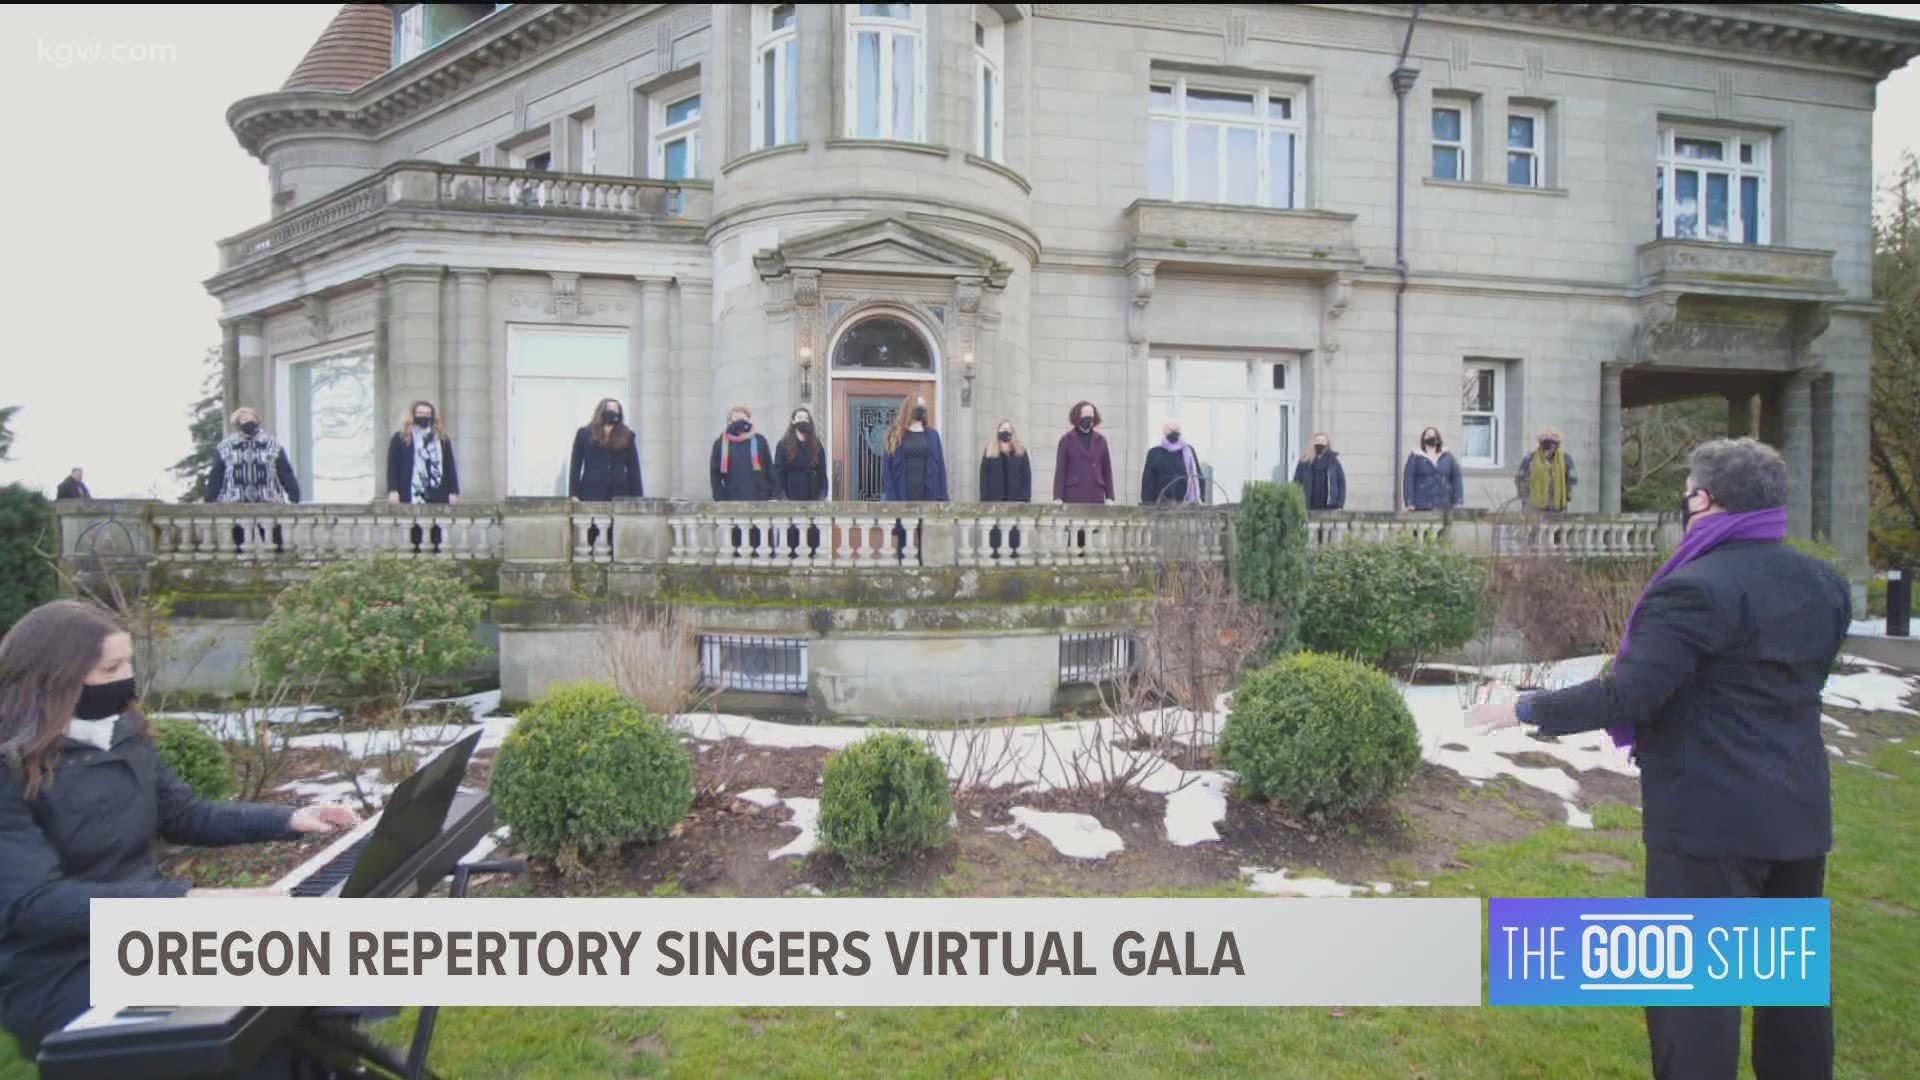 Oregon Repertory Singers will put on a virtual gala on Wednesday, Feb. 24. The event will feature a total of 13 performances.